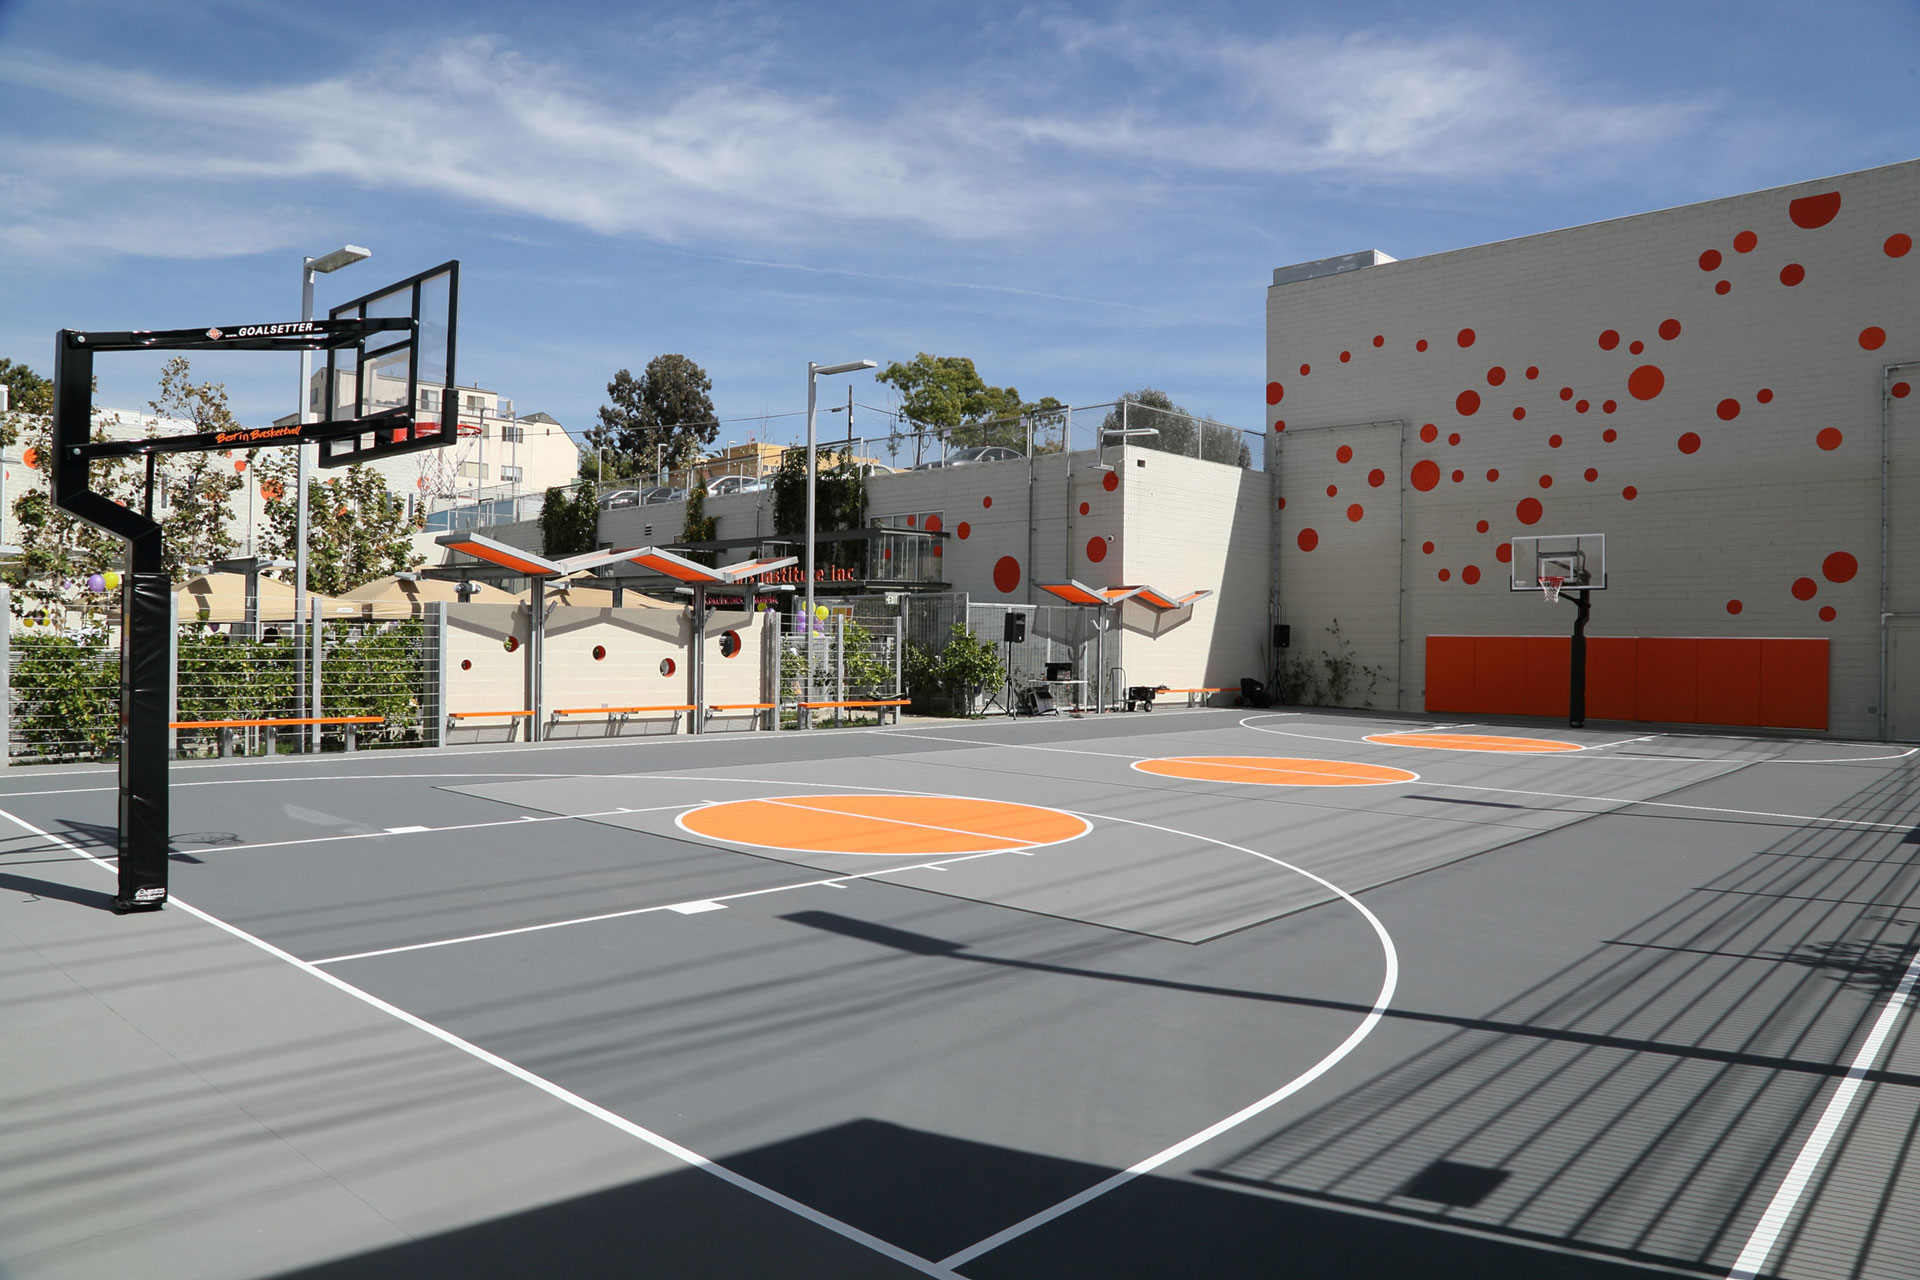 A photo of the completed sports court.